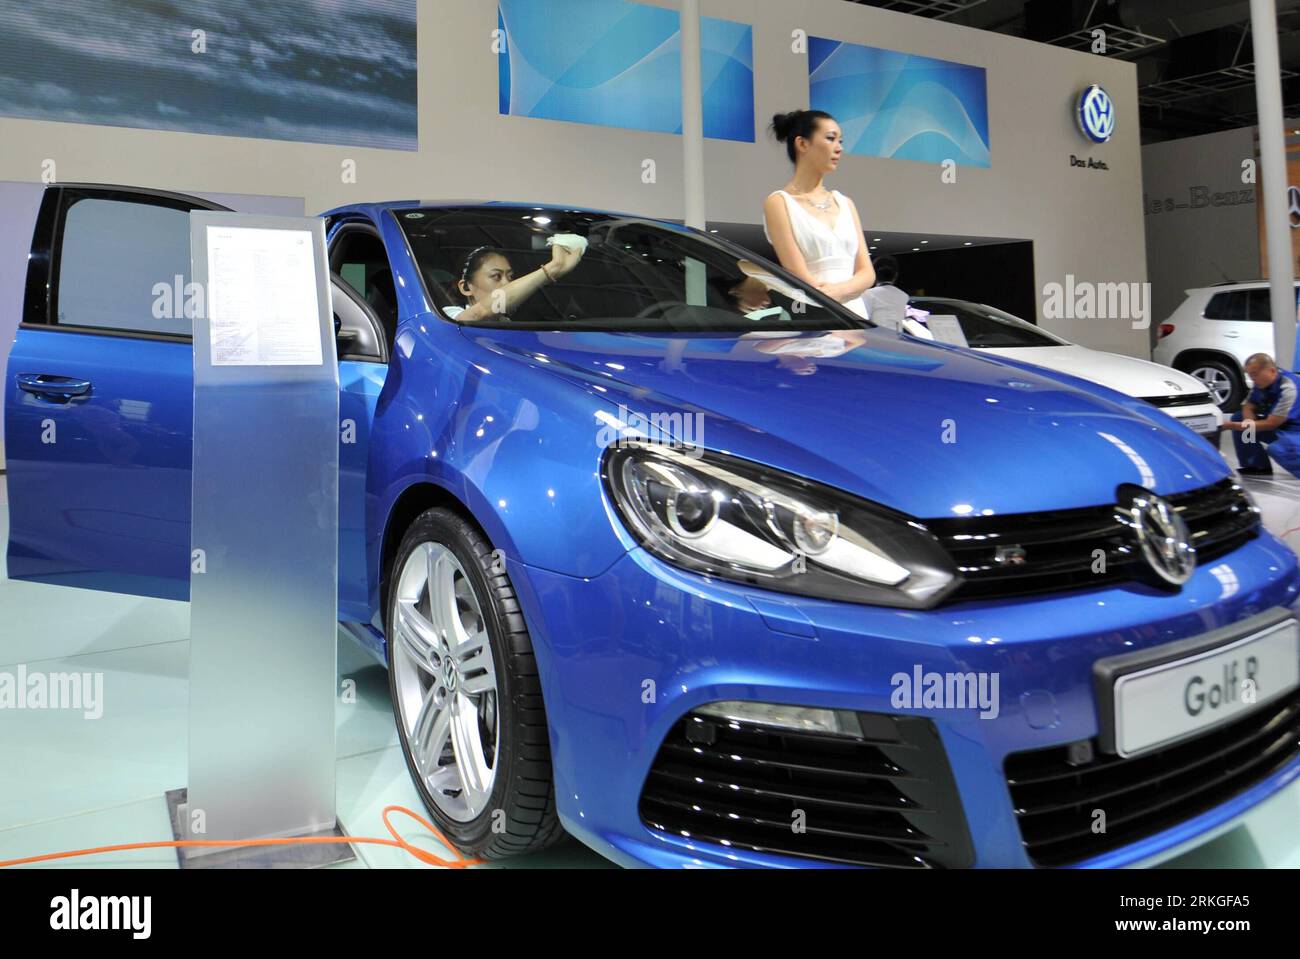 Bildnummer: 55590483  Datum: 13.07.2011  Copyright: imago/Xinhua (110713) -- CHANGCHUN, July 13, 2011 (Xinhua) -- Staff members get ready at the showroom of Volkswagen in Changchun, capital of northeast China s Jilin Province, July 13, 2011, two days ahead of the 8th China Changchun International Auto Expo. The expo will be held in Changchun from July 15 to 24. More than 1000 vehicles will be displayed at the event. (Xinhua/Lin Hong) (zhs) CHINA-CHANGCHUN-AUTO SHOW (CN) PUBLICATIONxNOTxINxCHN Wirtschaft Automobilausstellung Objekte xjh x0x 2011 quer premiumd     Bildnummer 55590483 Date 13 07 Stock Photo